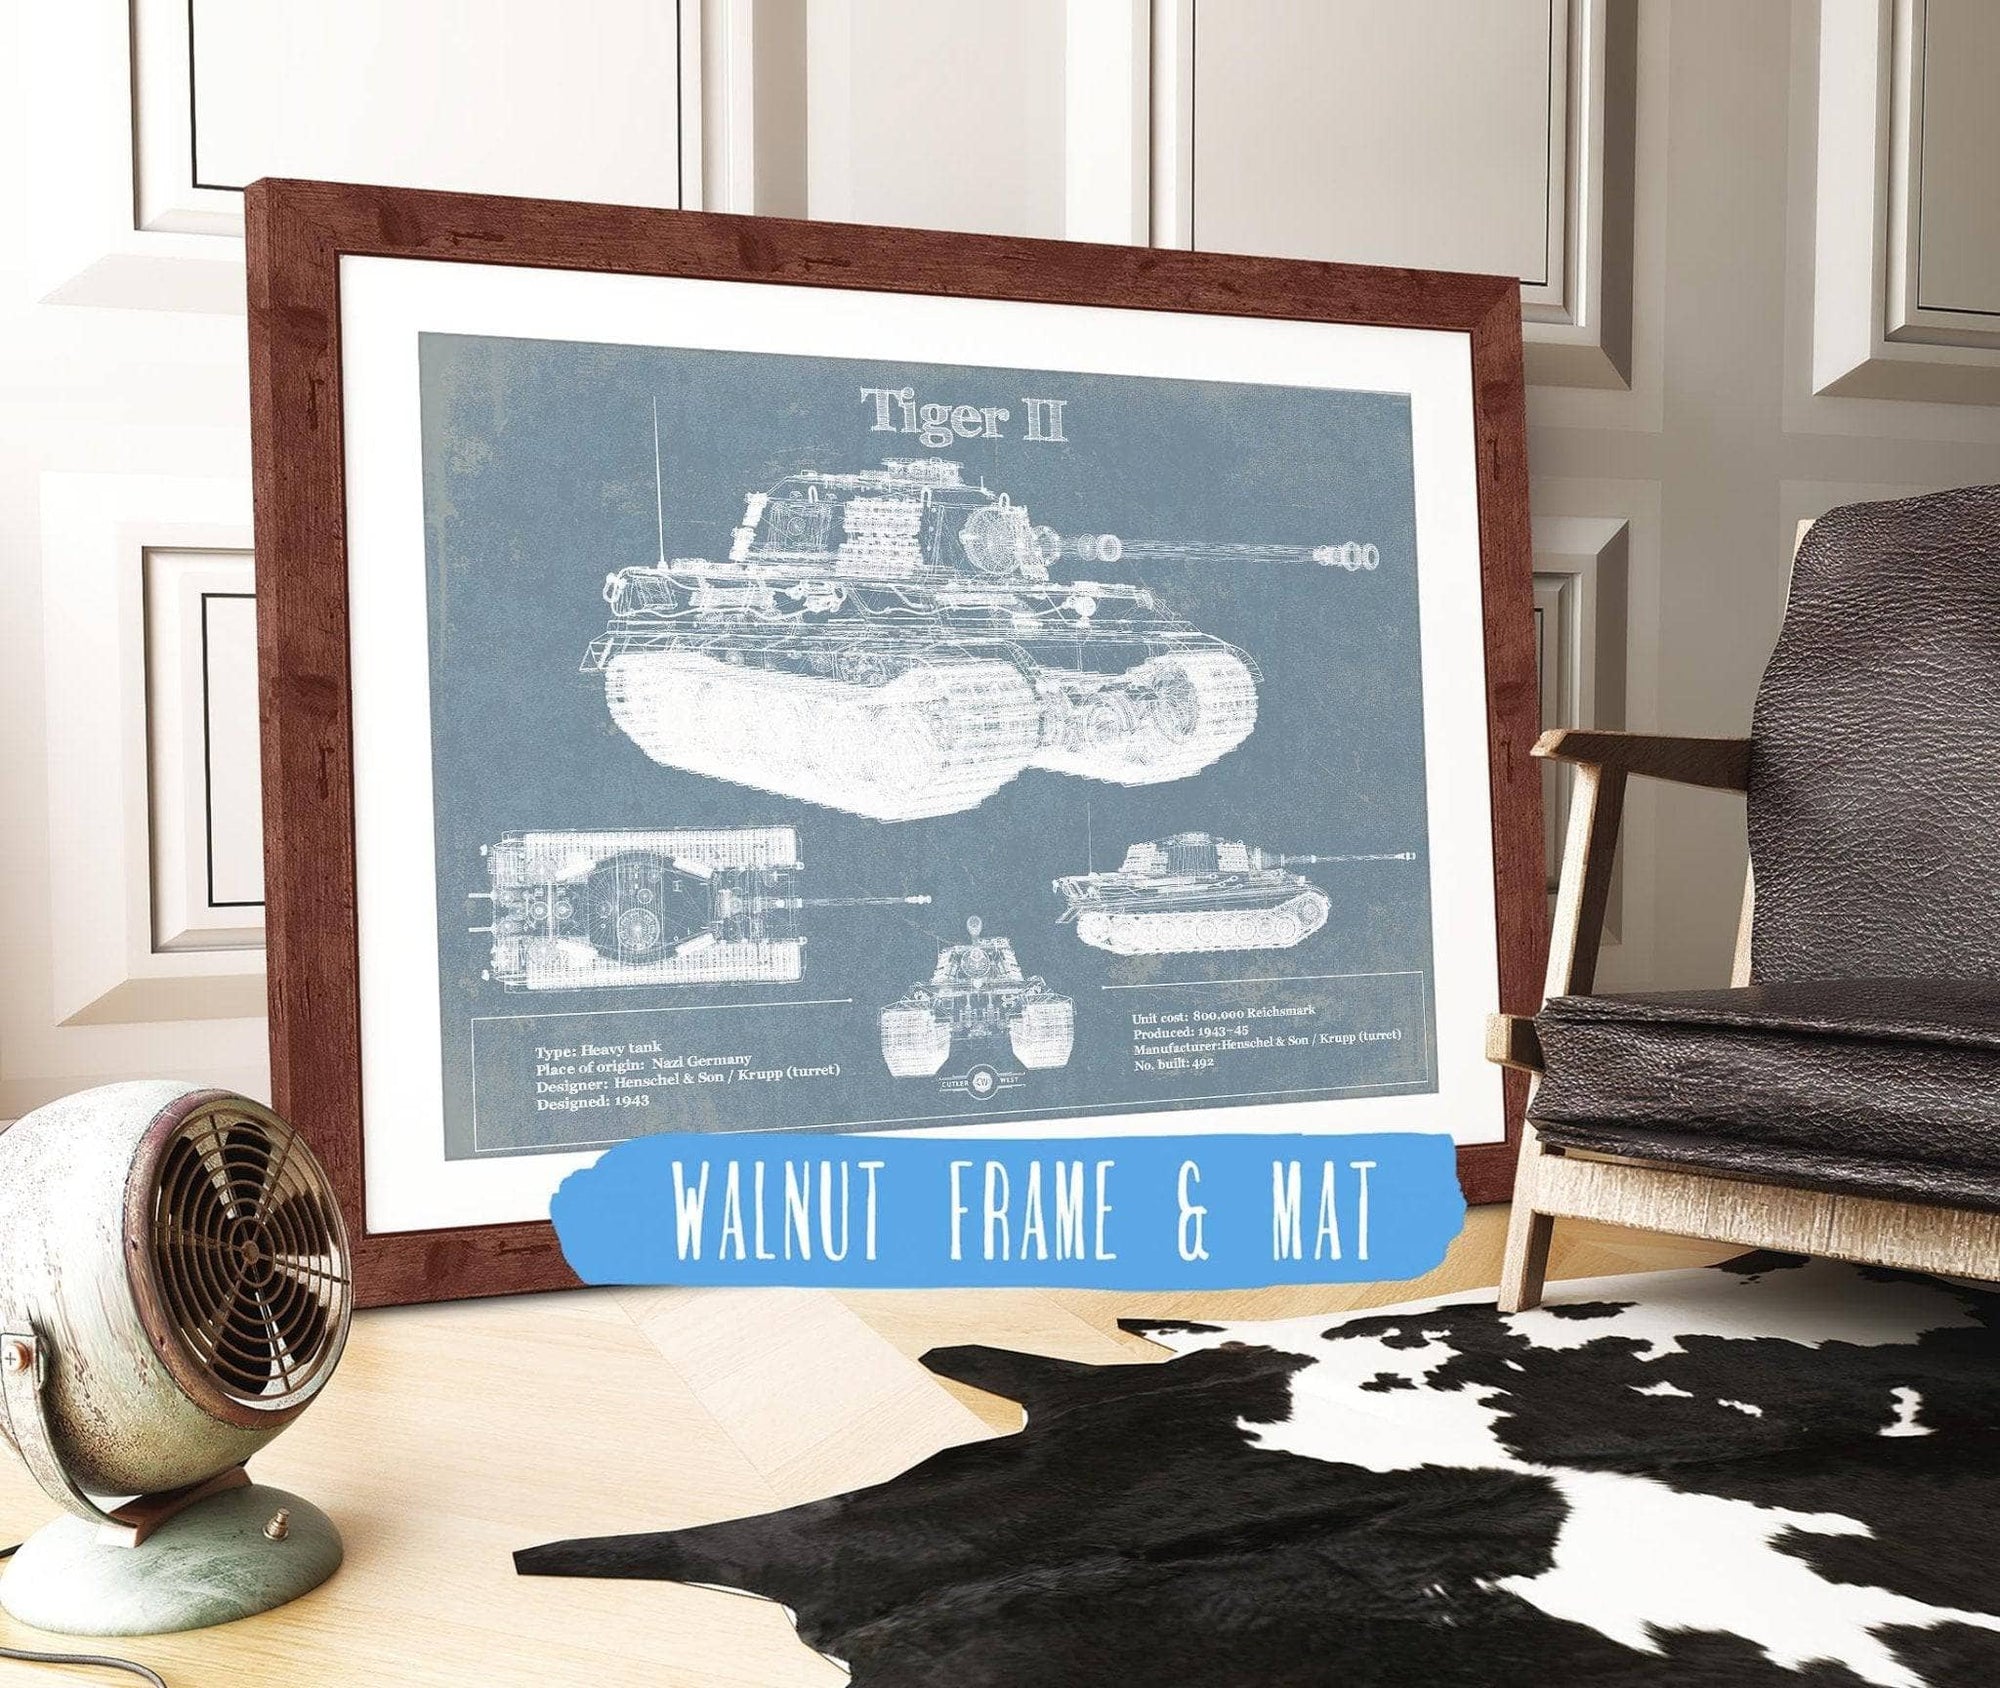 Cutler West Military Weapons Collection 14" x 11" / Walnut Frame & Mat Tiger II Vintage German Tank Military Print 845000232_24668